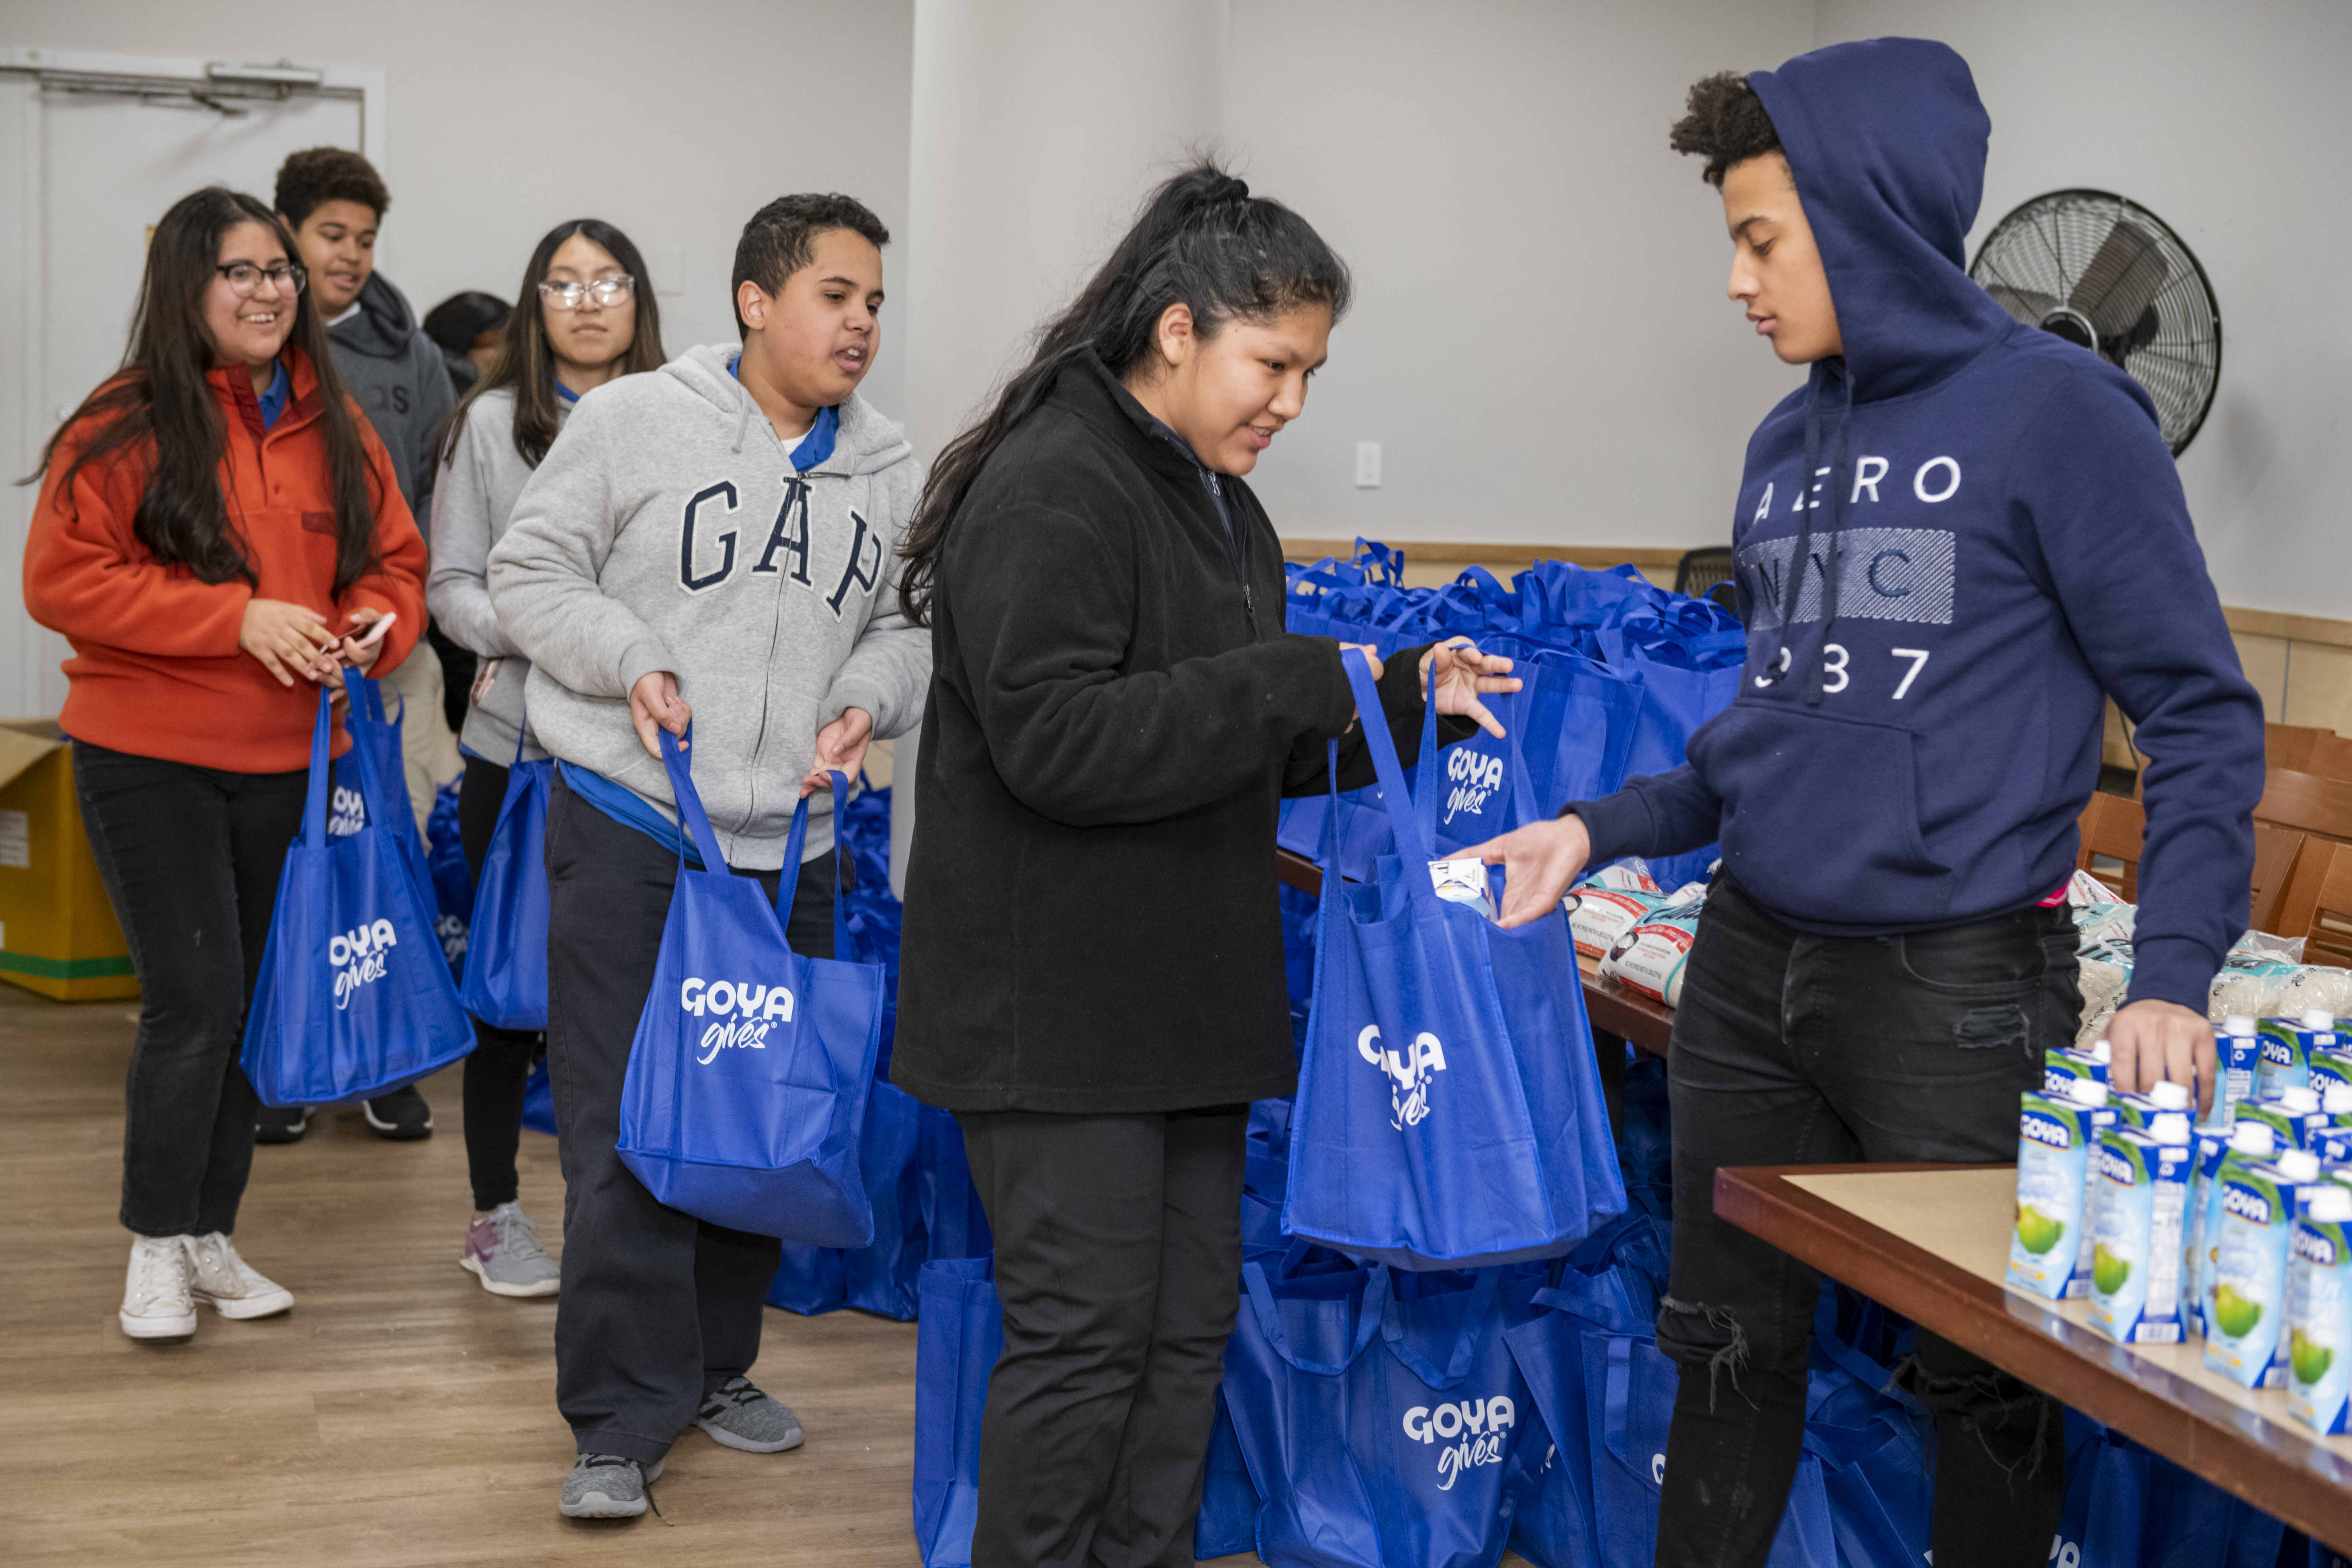 Press Release: GOYA FOODS DONATES 18,225 MEALS  TO NEW YORK CITY STUDENTS AND FAMILIES 